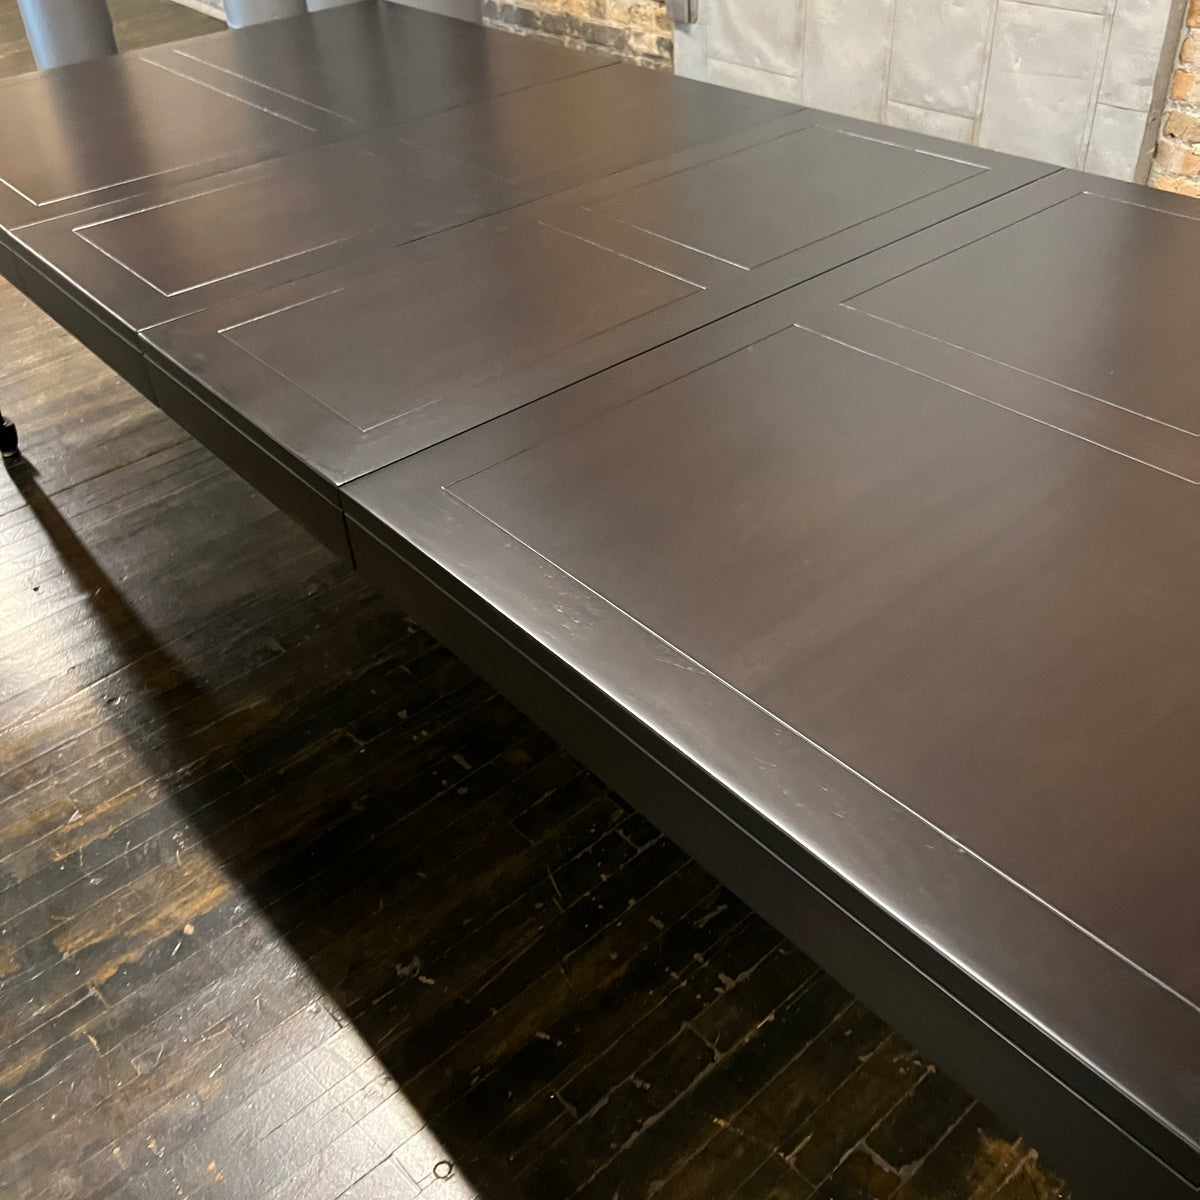 A refinished extension table that Michael Taylor designed for Baker Furniture.  This table starts out as a rectangle but with three impressive leaves it can extend to 122".  It was part of the Far East Collection he did for Baker. Chicago, IL Studio Sonja Milan